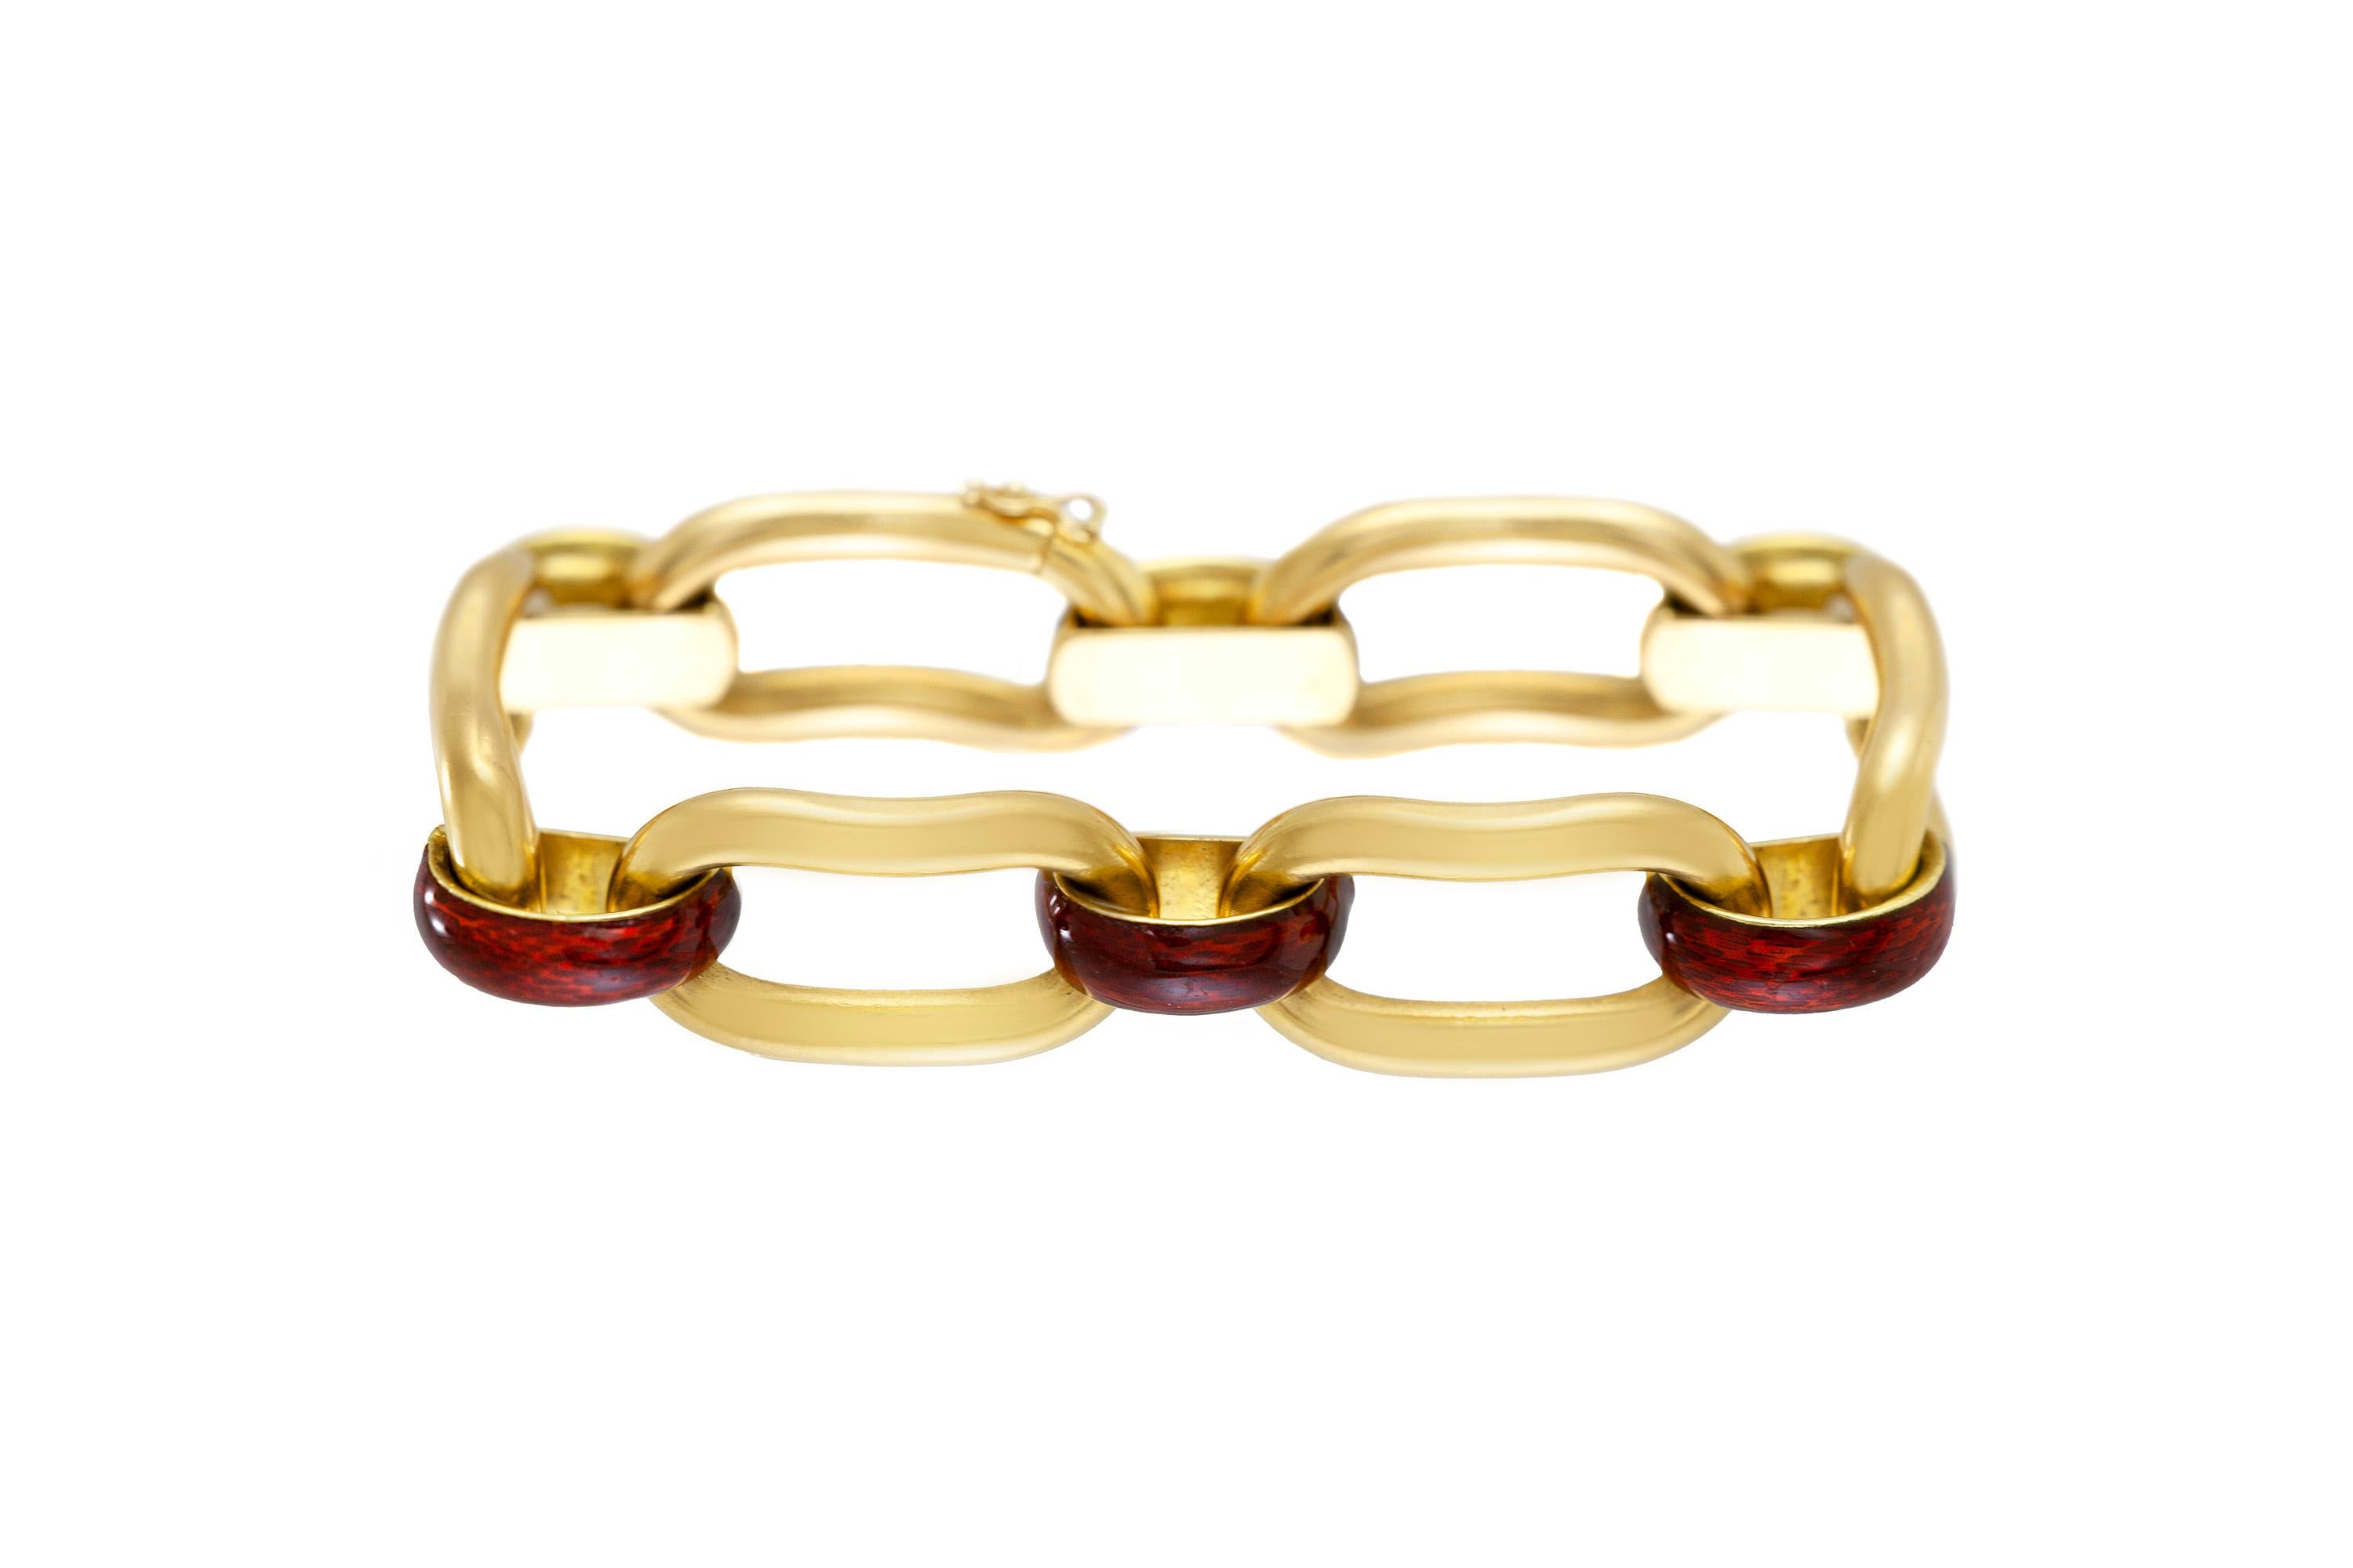 The bracelet is finely crafted in 18k yellow gold with brown enamel and weighing approximately total of 30.3 dwt.
Circa 1960.